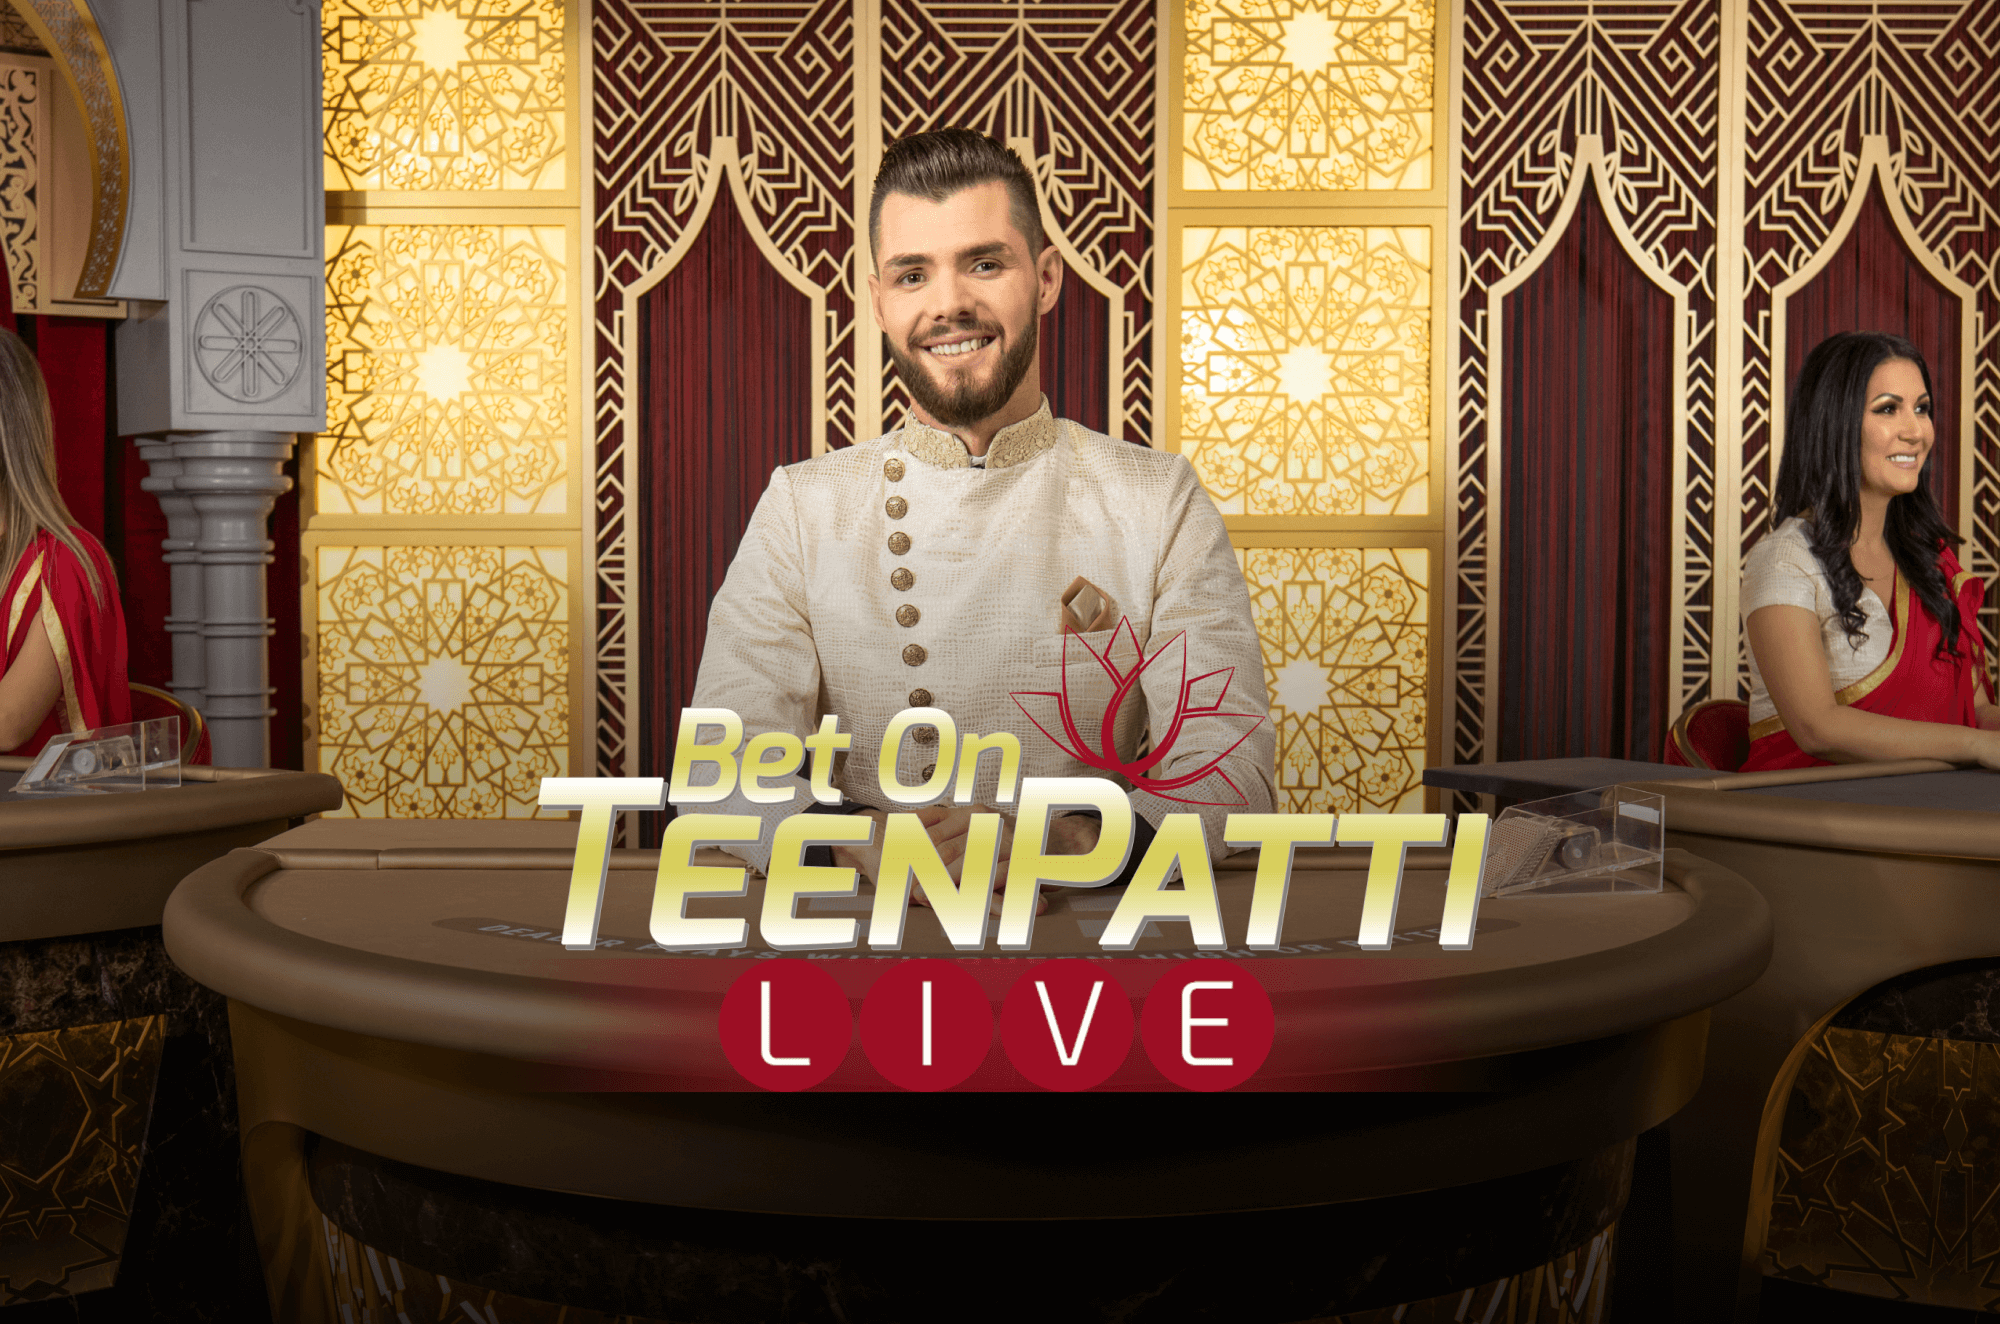 How to Win Bet on Teen Patti live